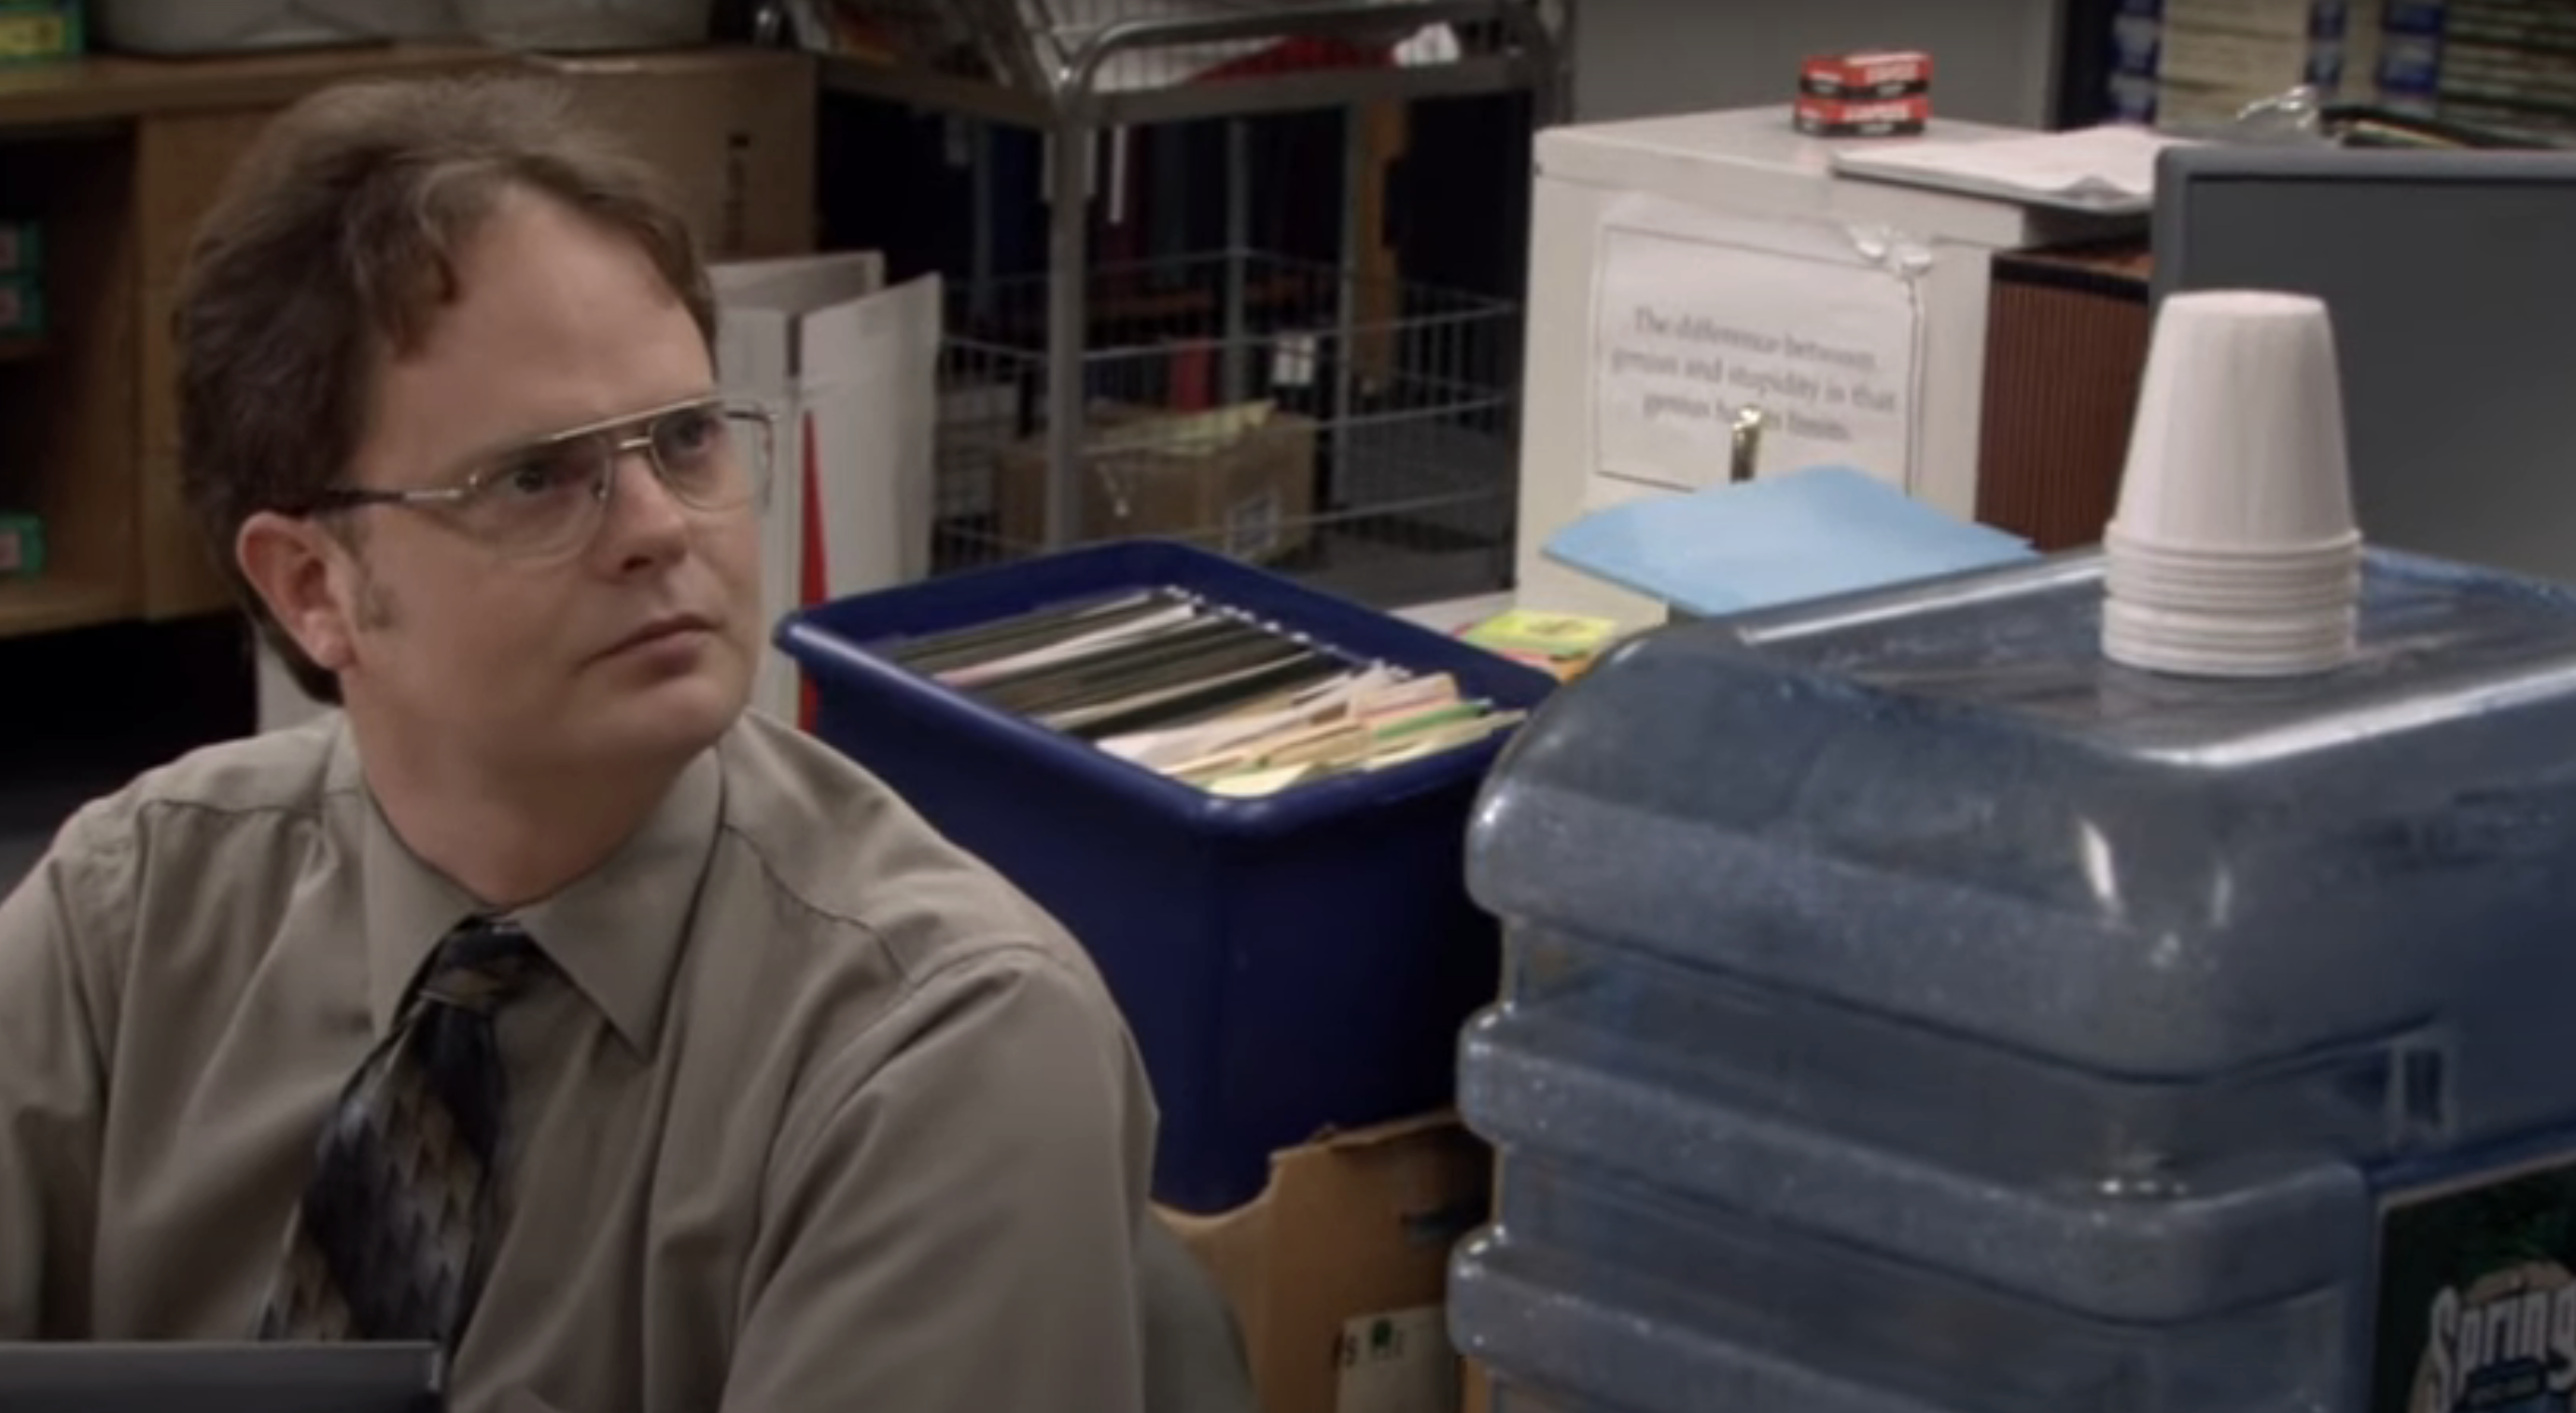 Character Dwight from &quot;The Office&quot; sits at a desk, looking to the side with a serious expression